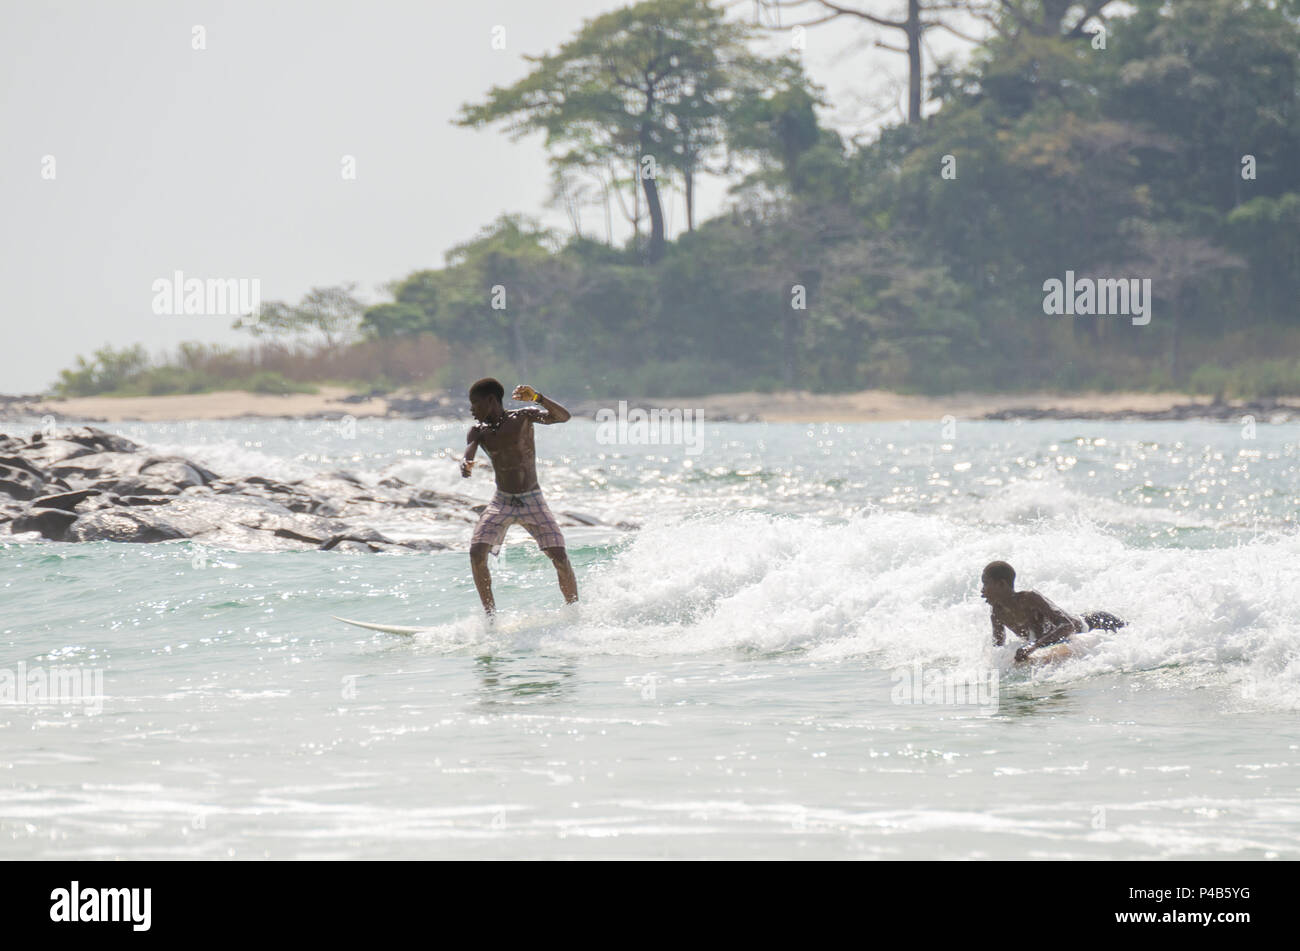 Bureh Beach, Sierra Leone - January 11, 2014: Two unidentified young African boys surfing at the only surf spot in the country Stock Photo